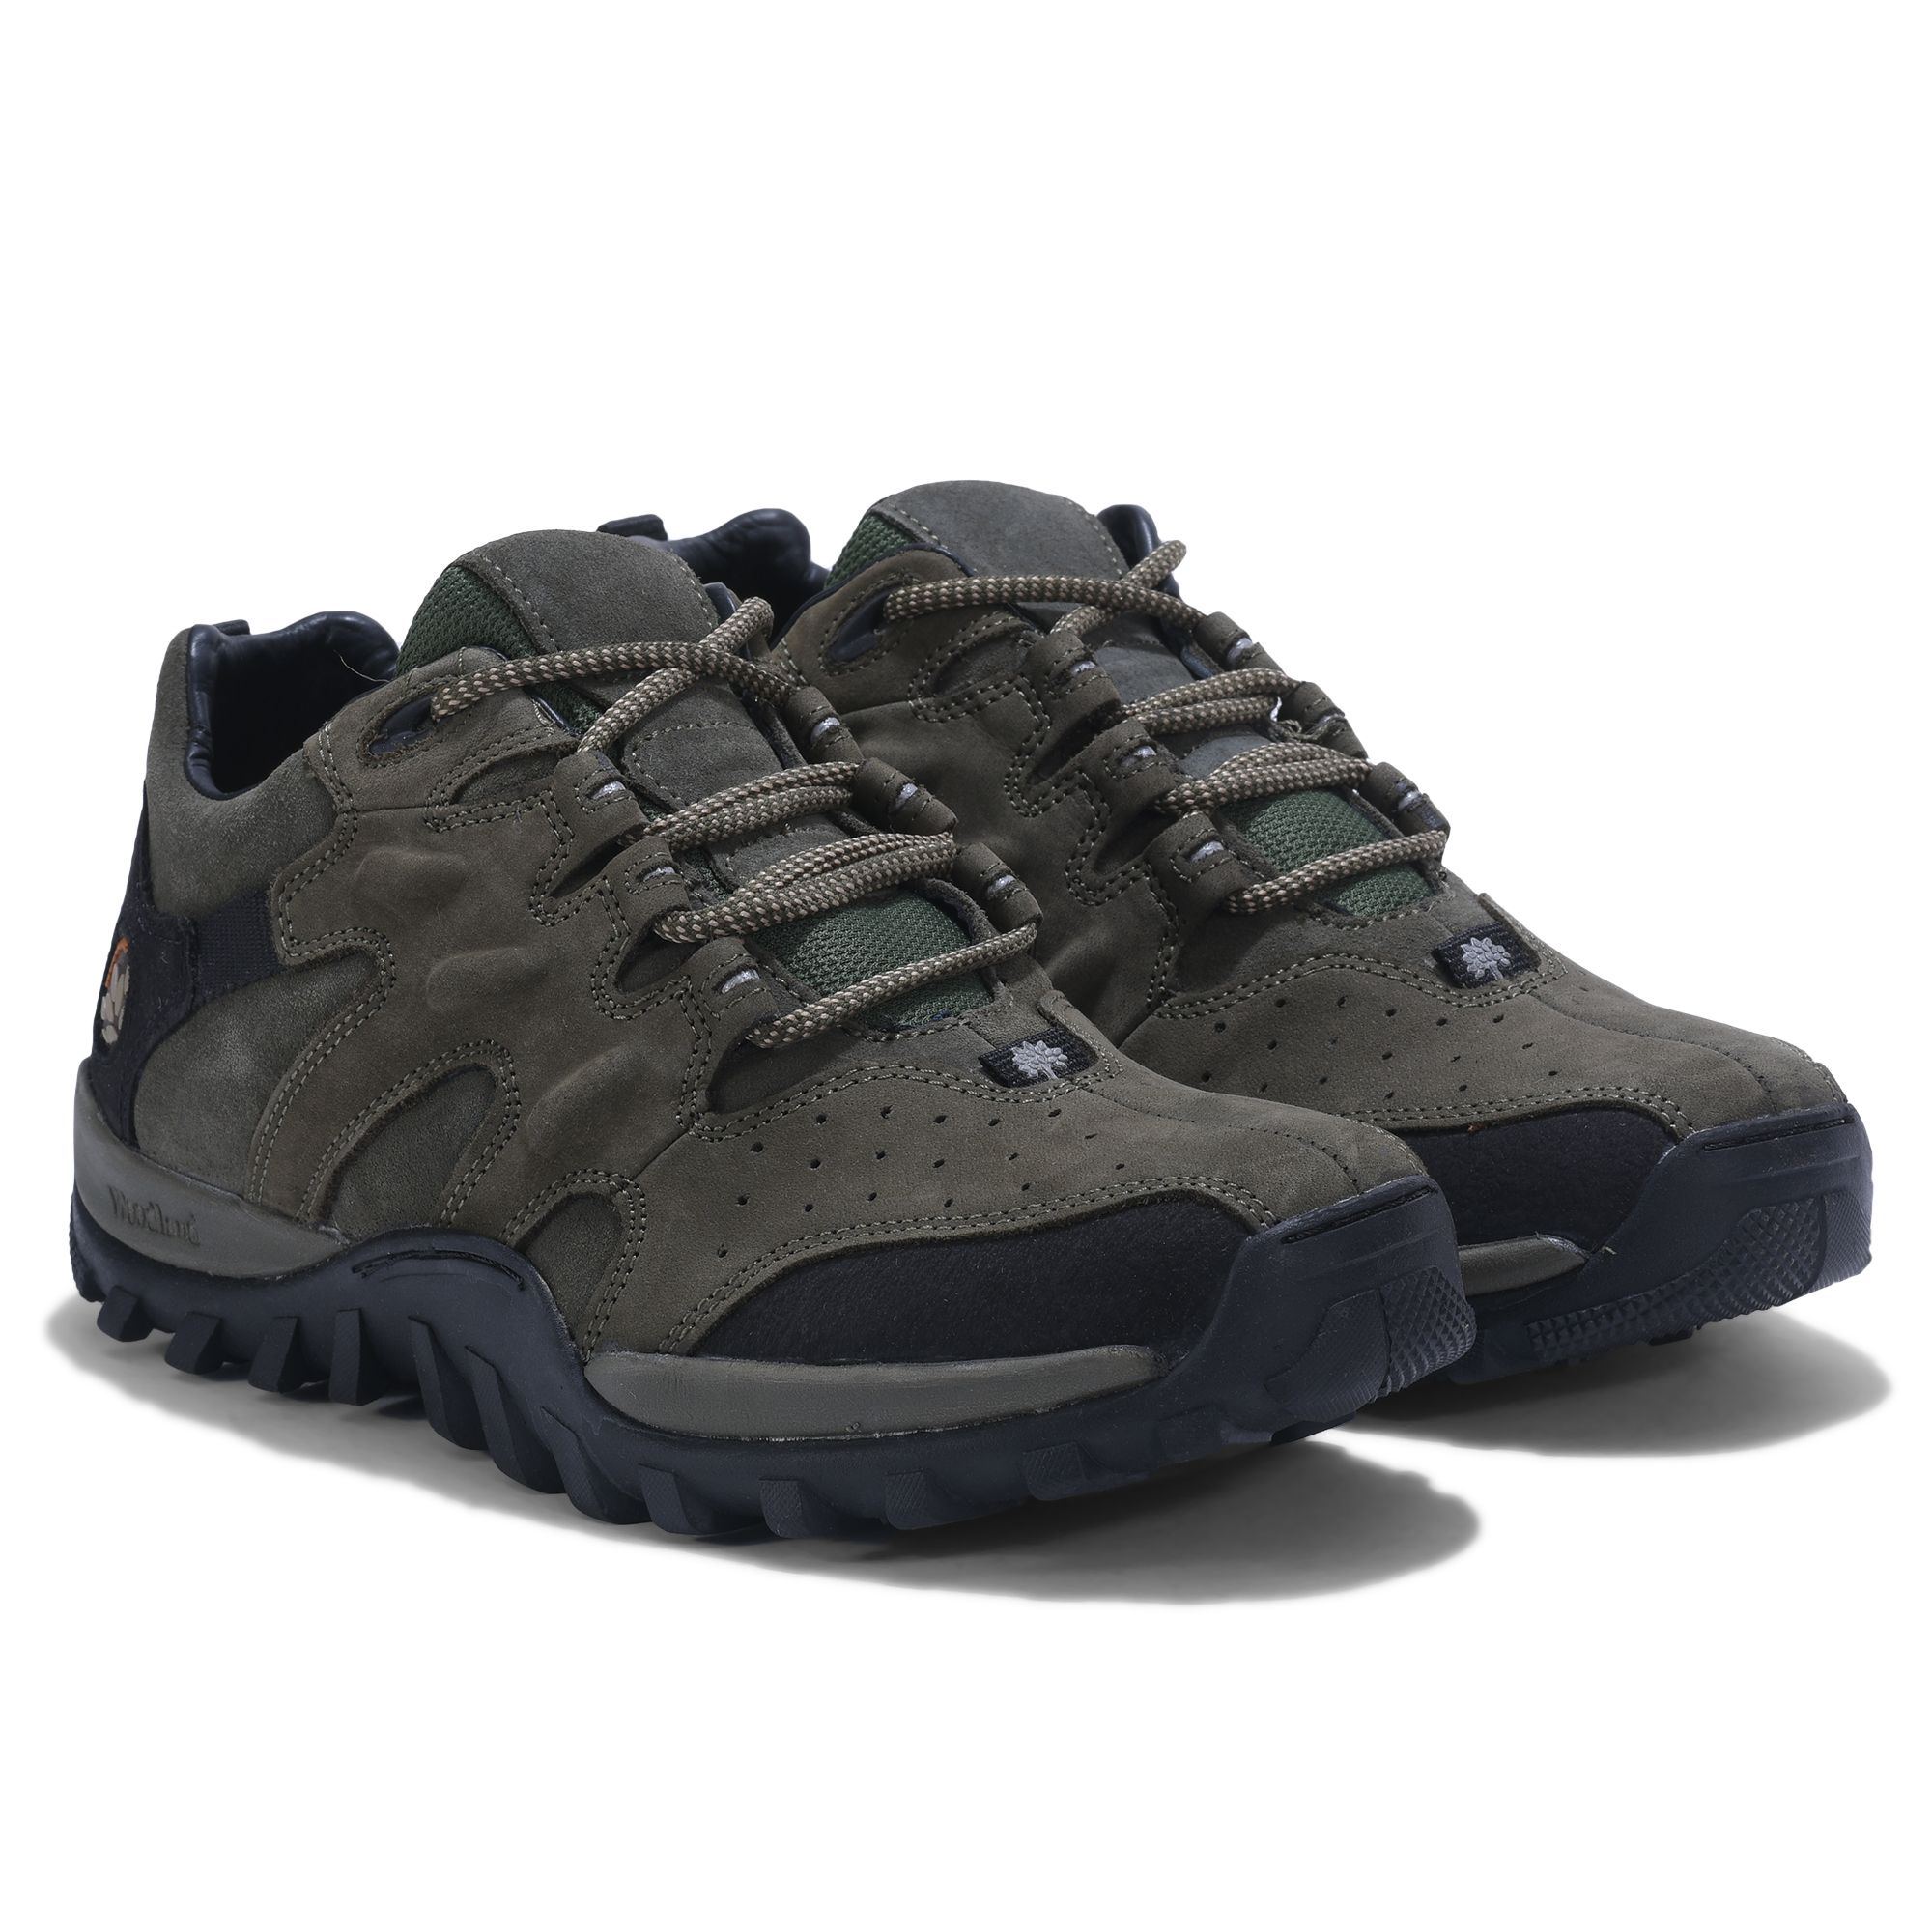 Buy Woodland Men's Sand Outdoor Shoes for Men at Best Price @ Tata CLiQ